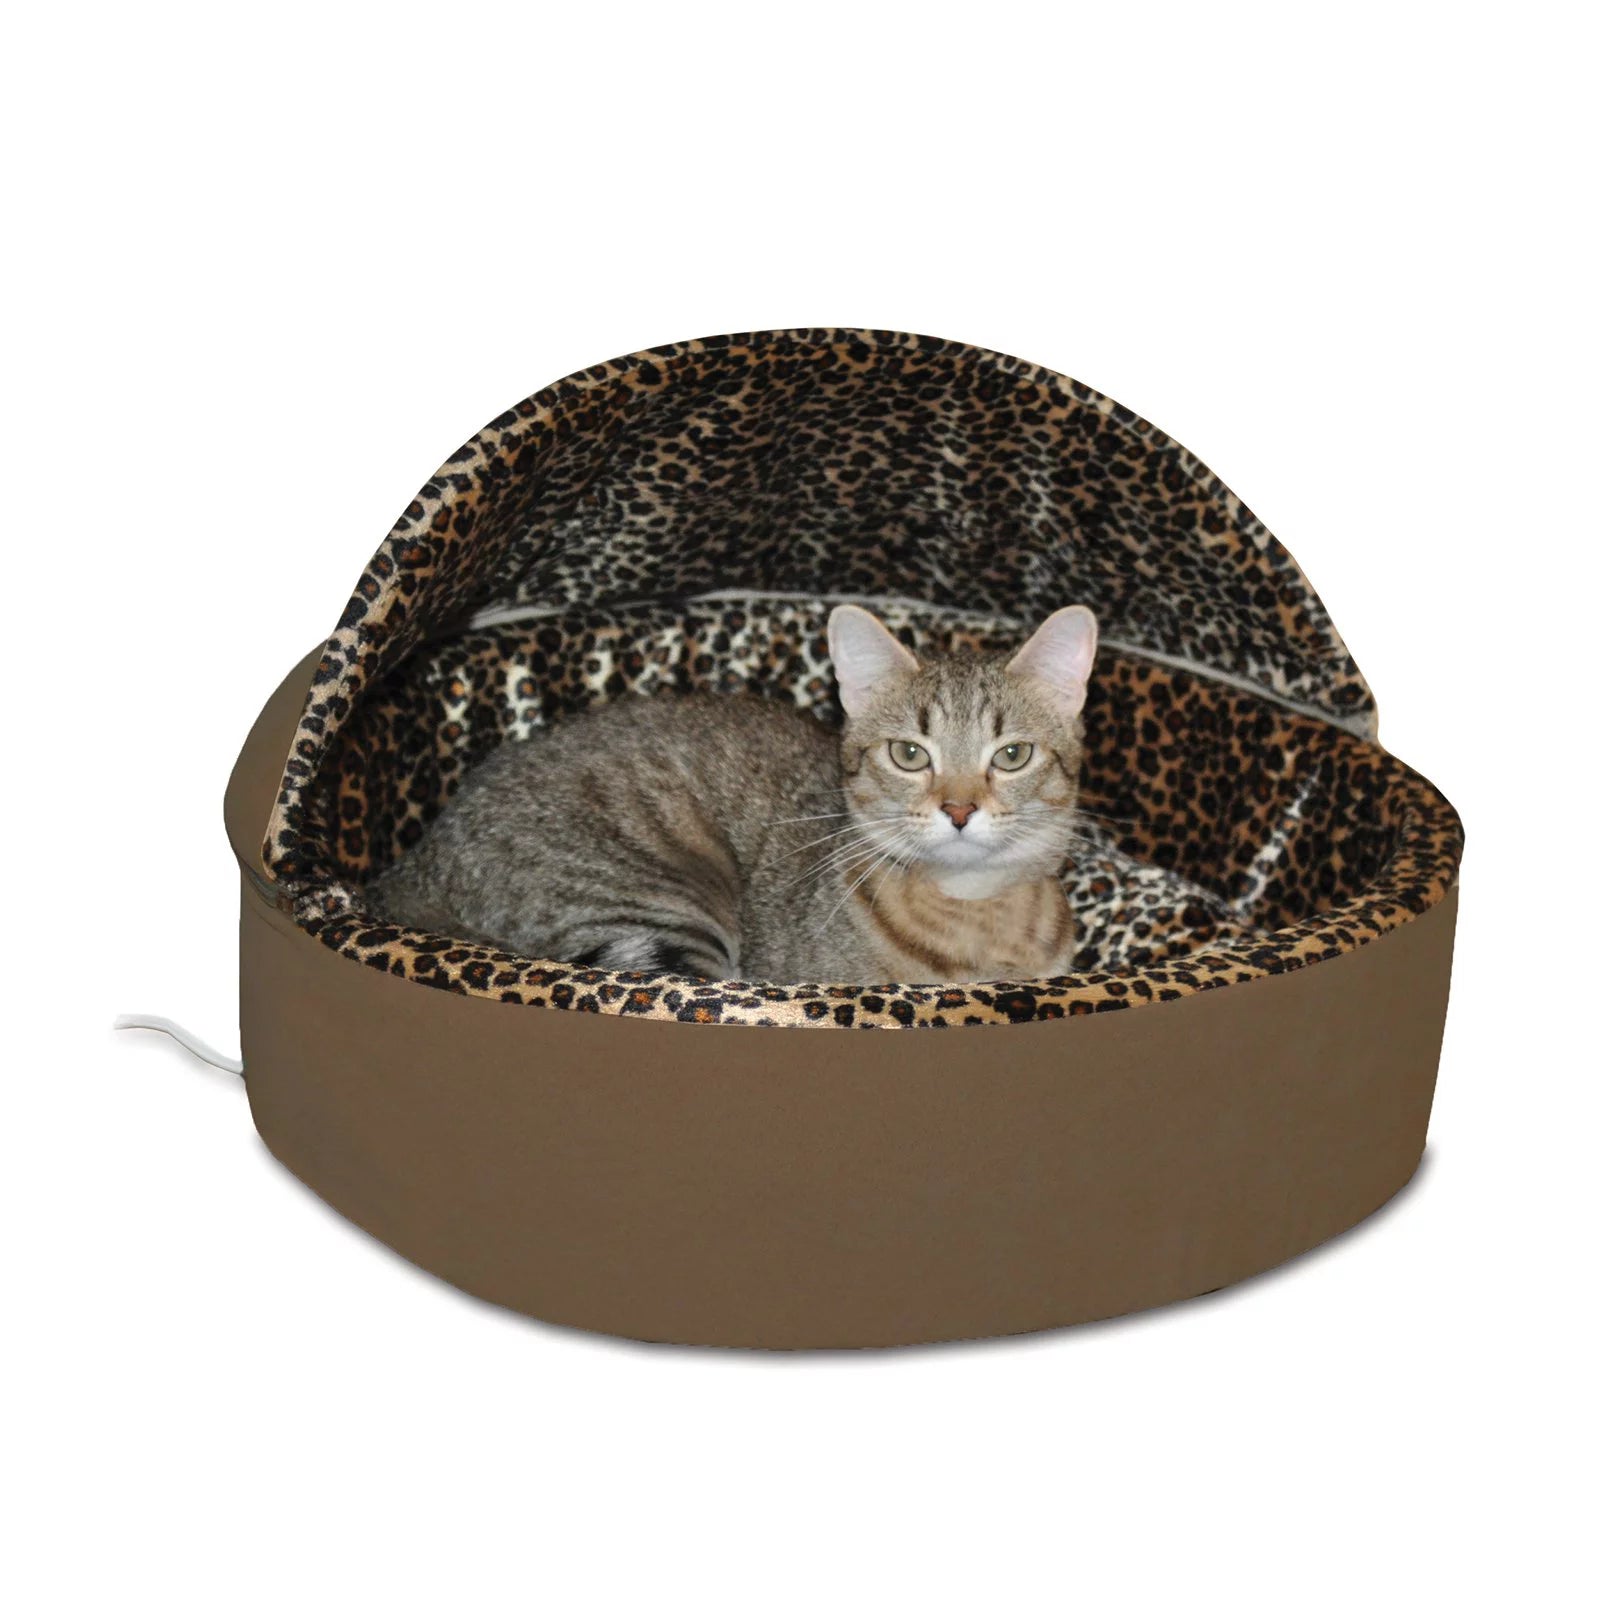 K&H Thermo Kitty Pet Cat Bed, Tan/Leopard